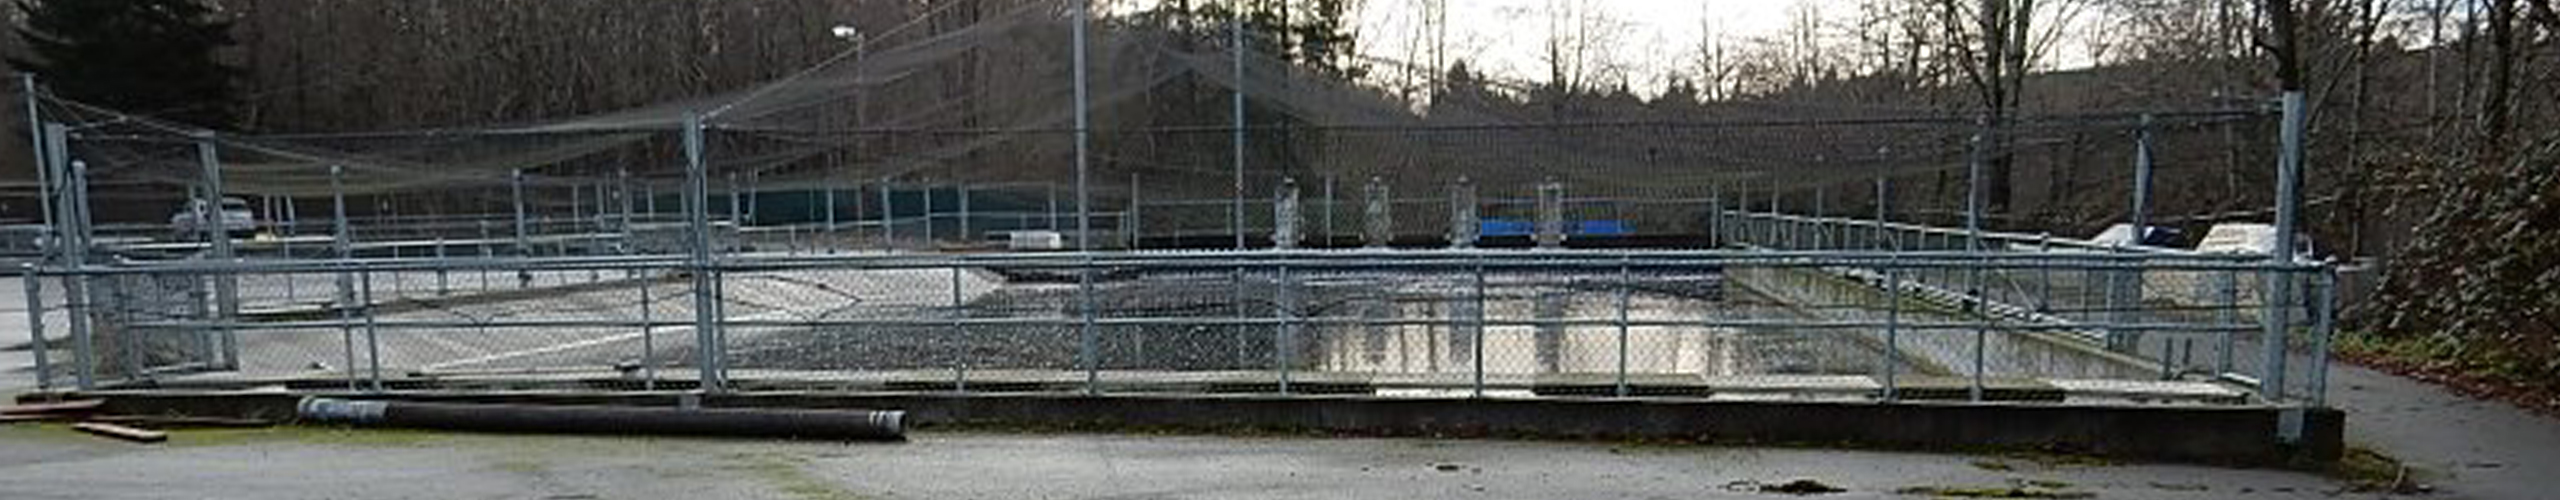 Tulalip Natural Resources image of view of salmon hatchery